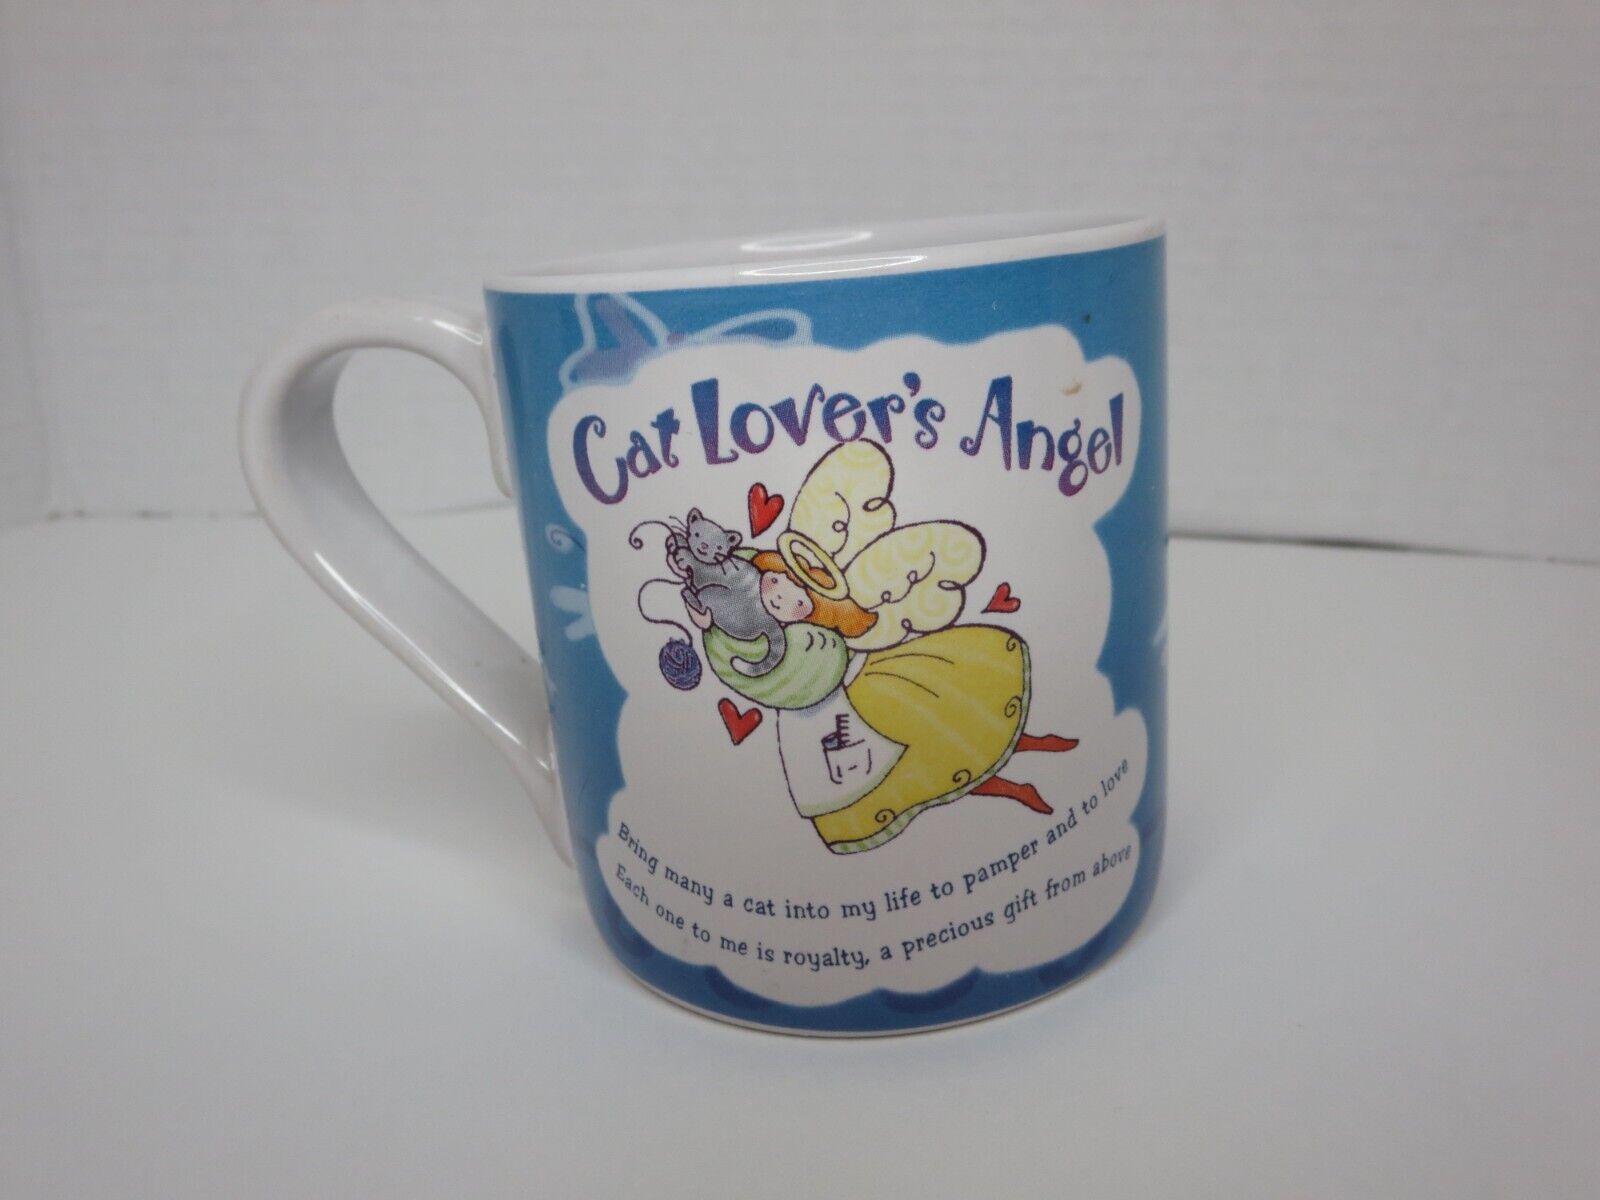 Cat Lover\'s Angel Coffee Mug With a saying on part of mug